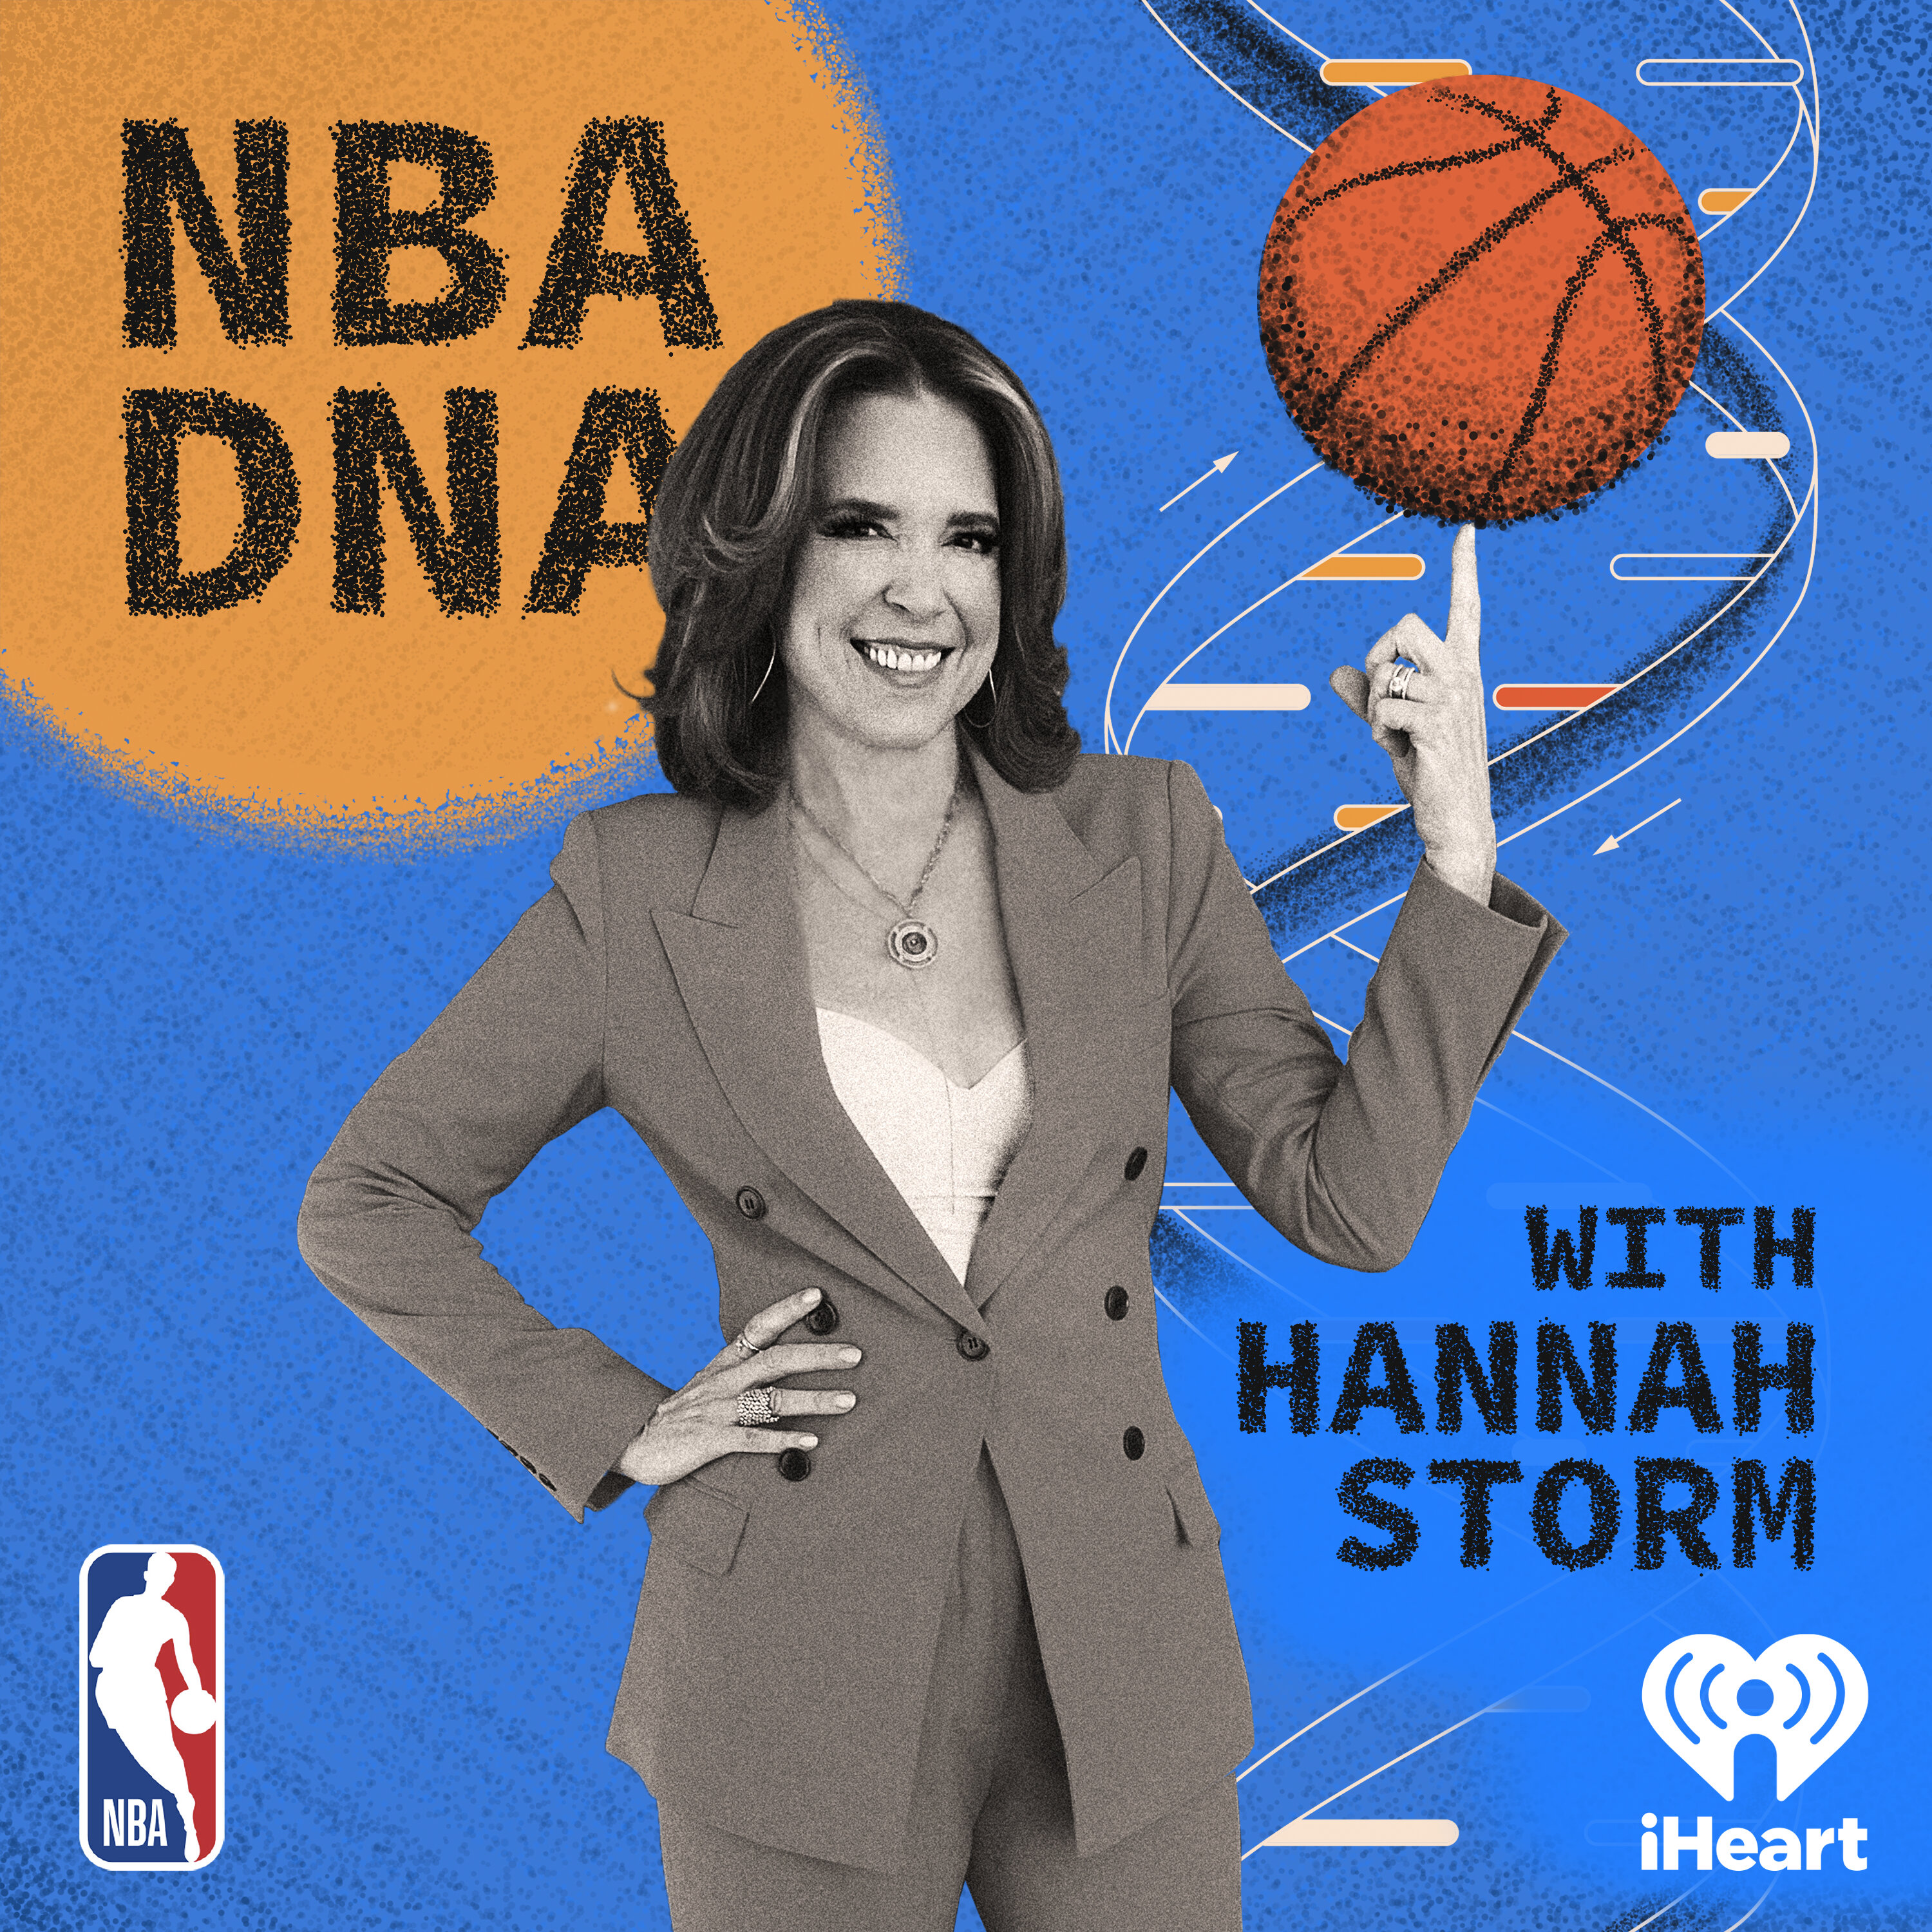 NBA DNA with Hannah Storm Image